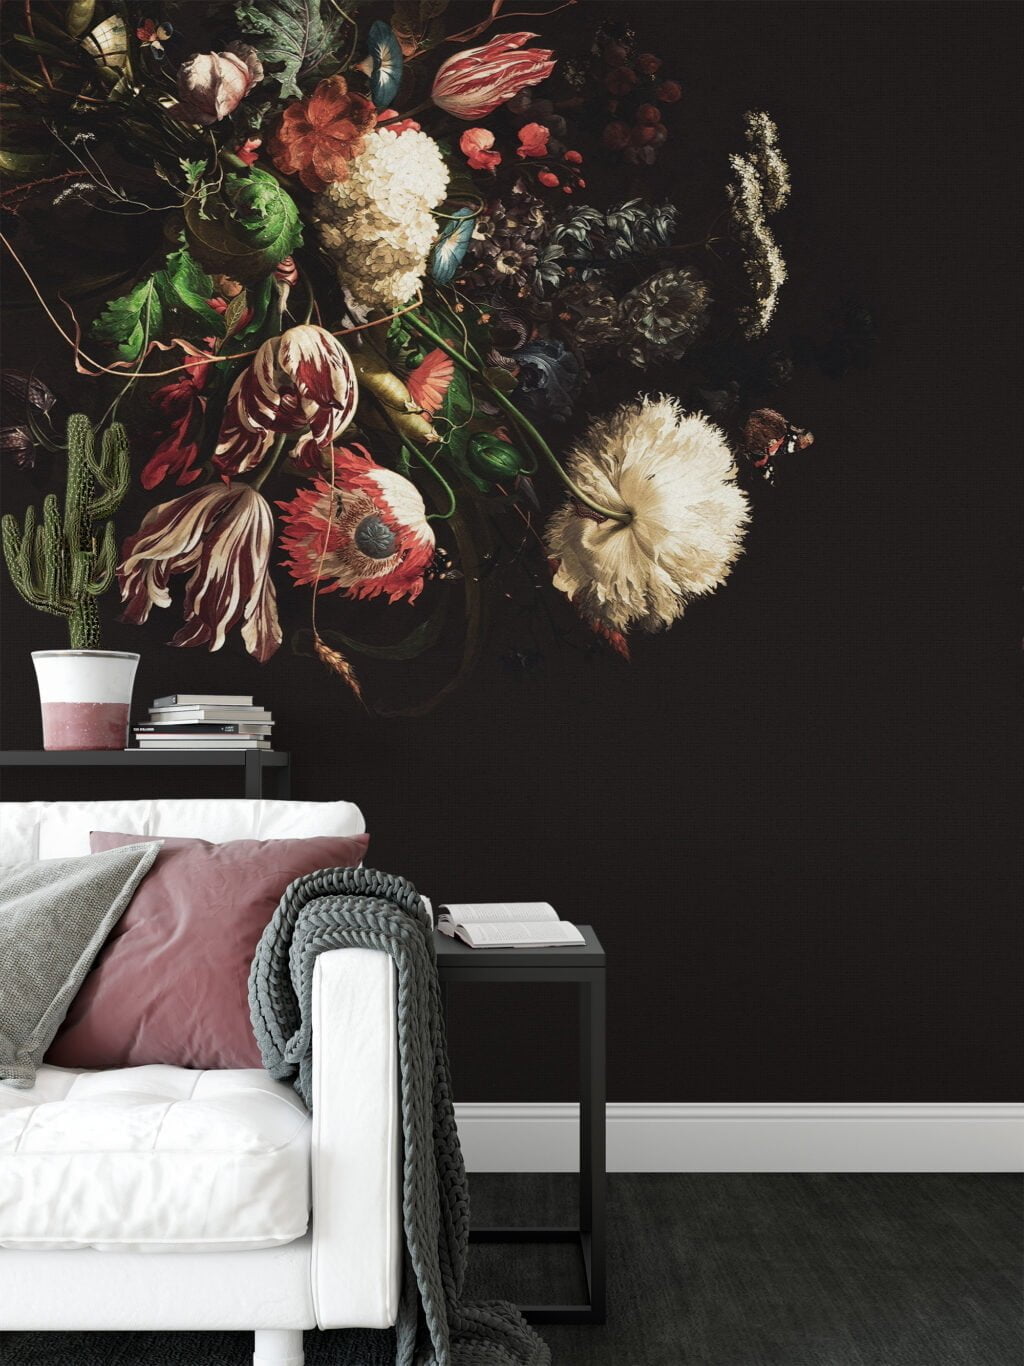 Elegant Vintage Bouquet on Dark Background Wallpaper, Peel and Stick Self Adhesive Removable Wall Mural, Retro Floral Pattern